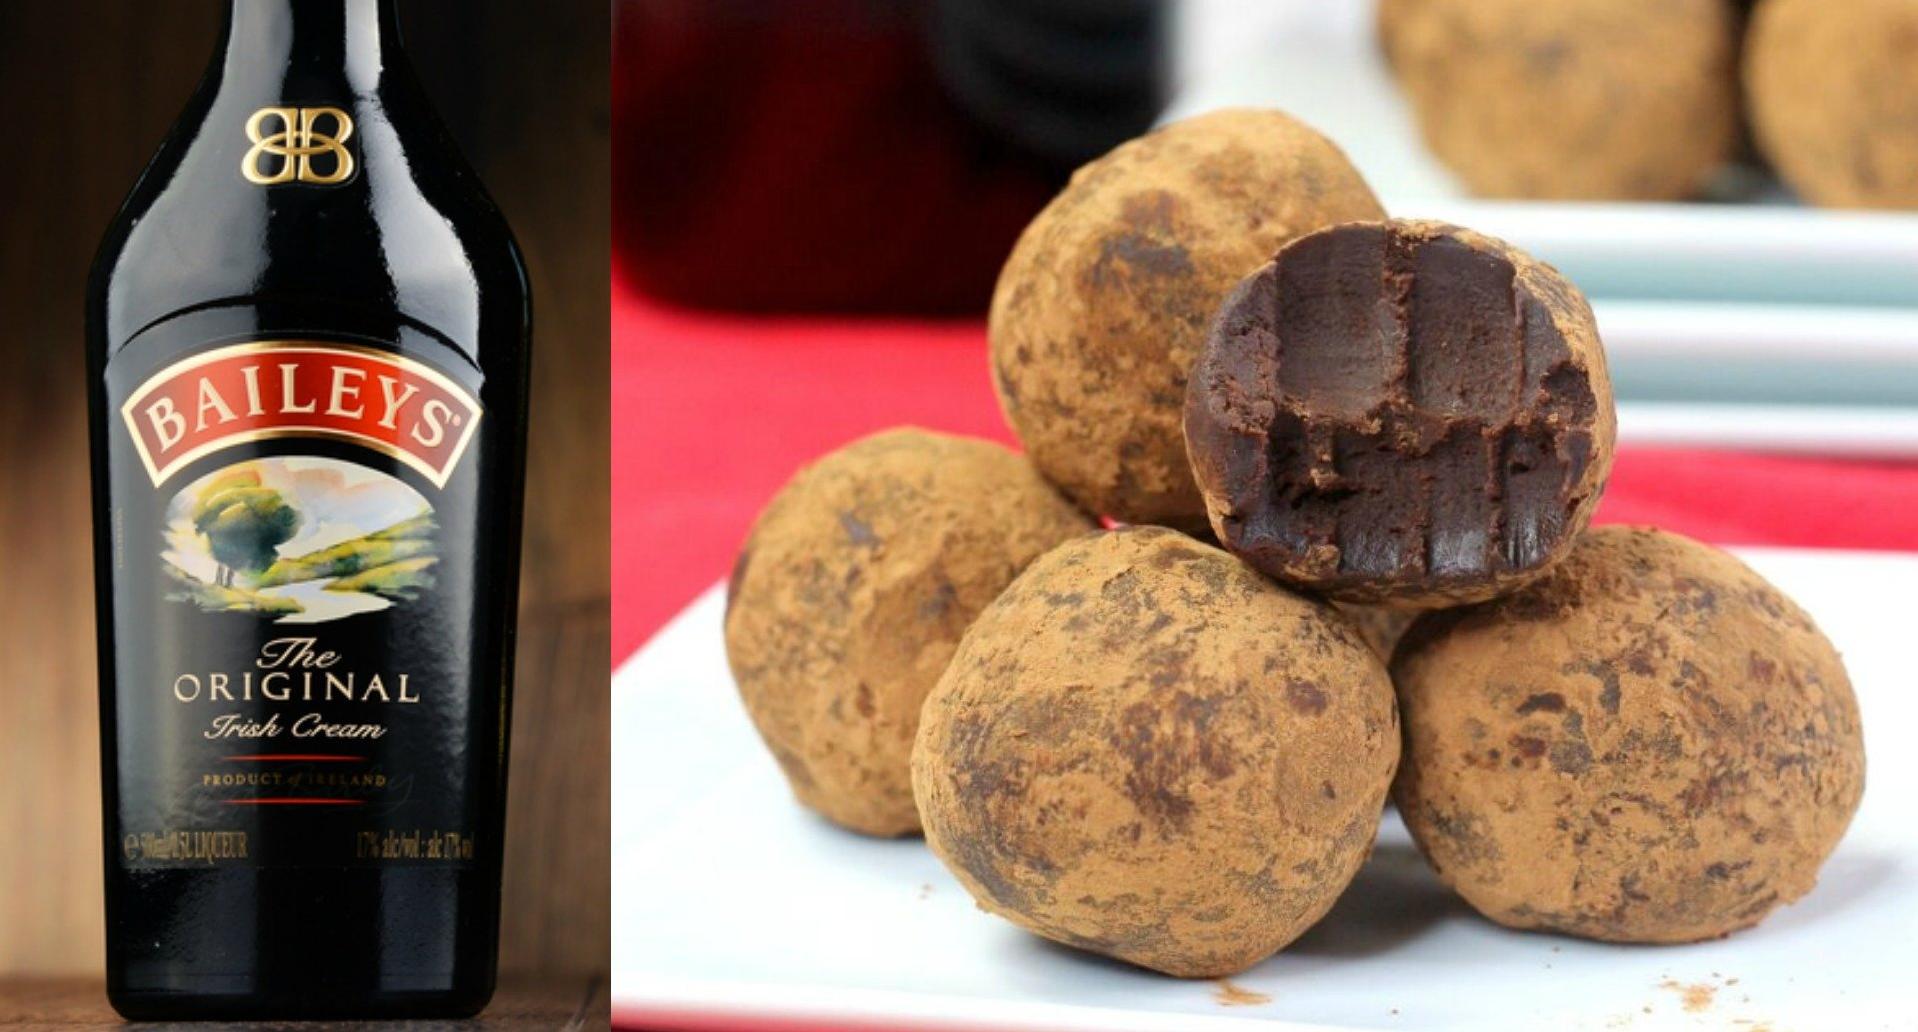 These fudgy truffles bring a unique flavor of Ireland to your dessert table.